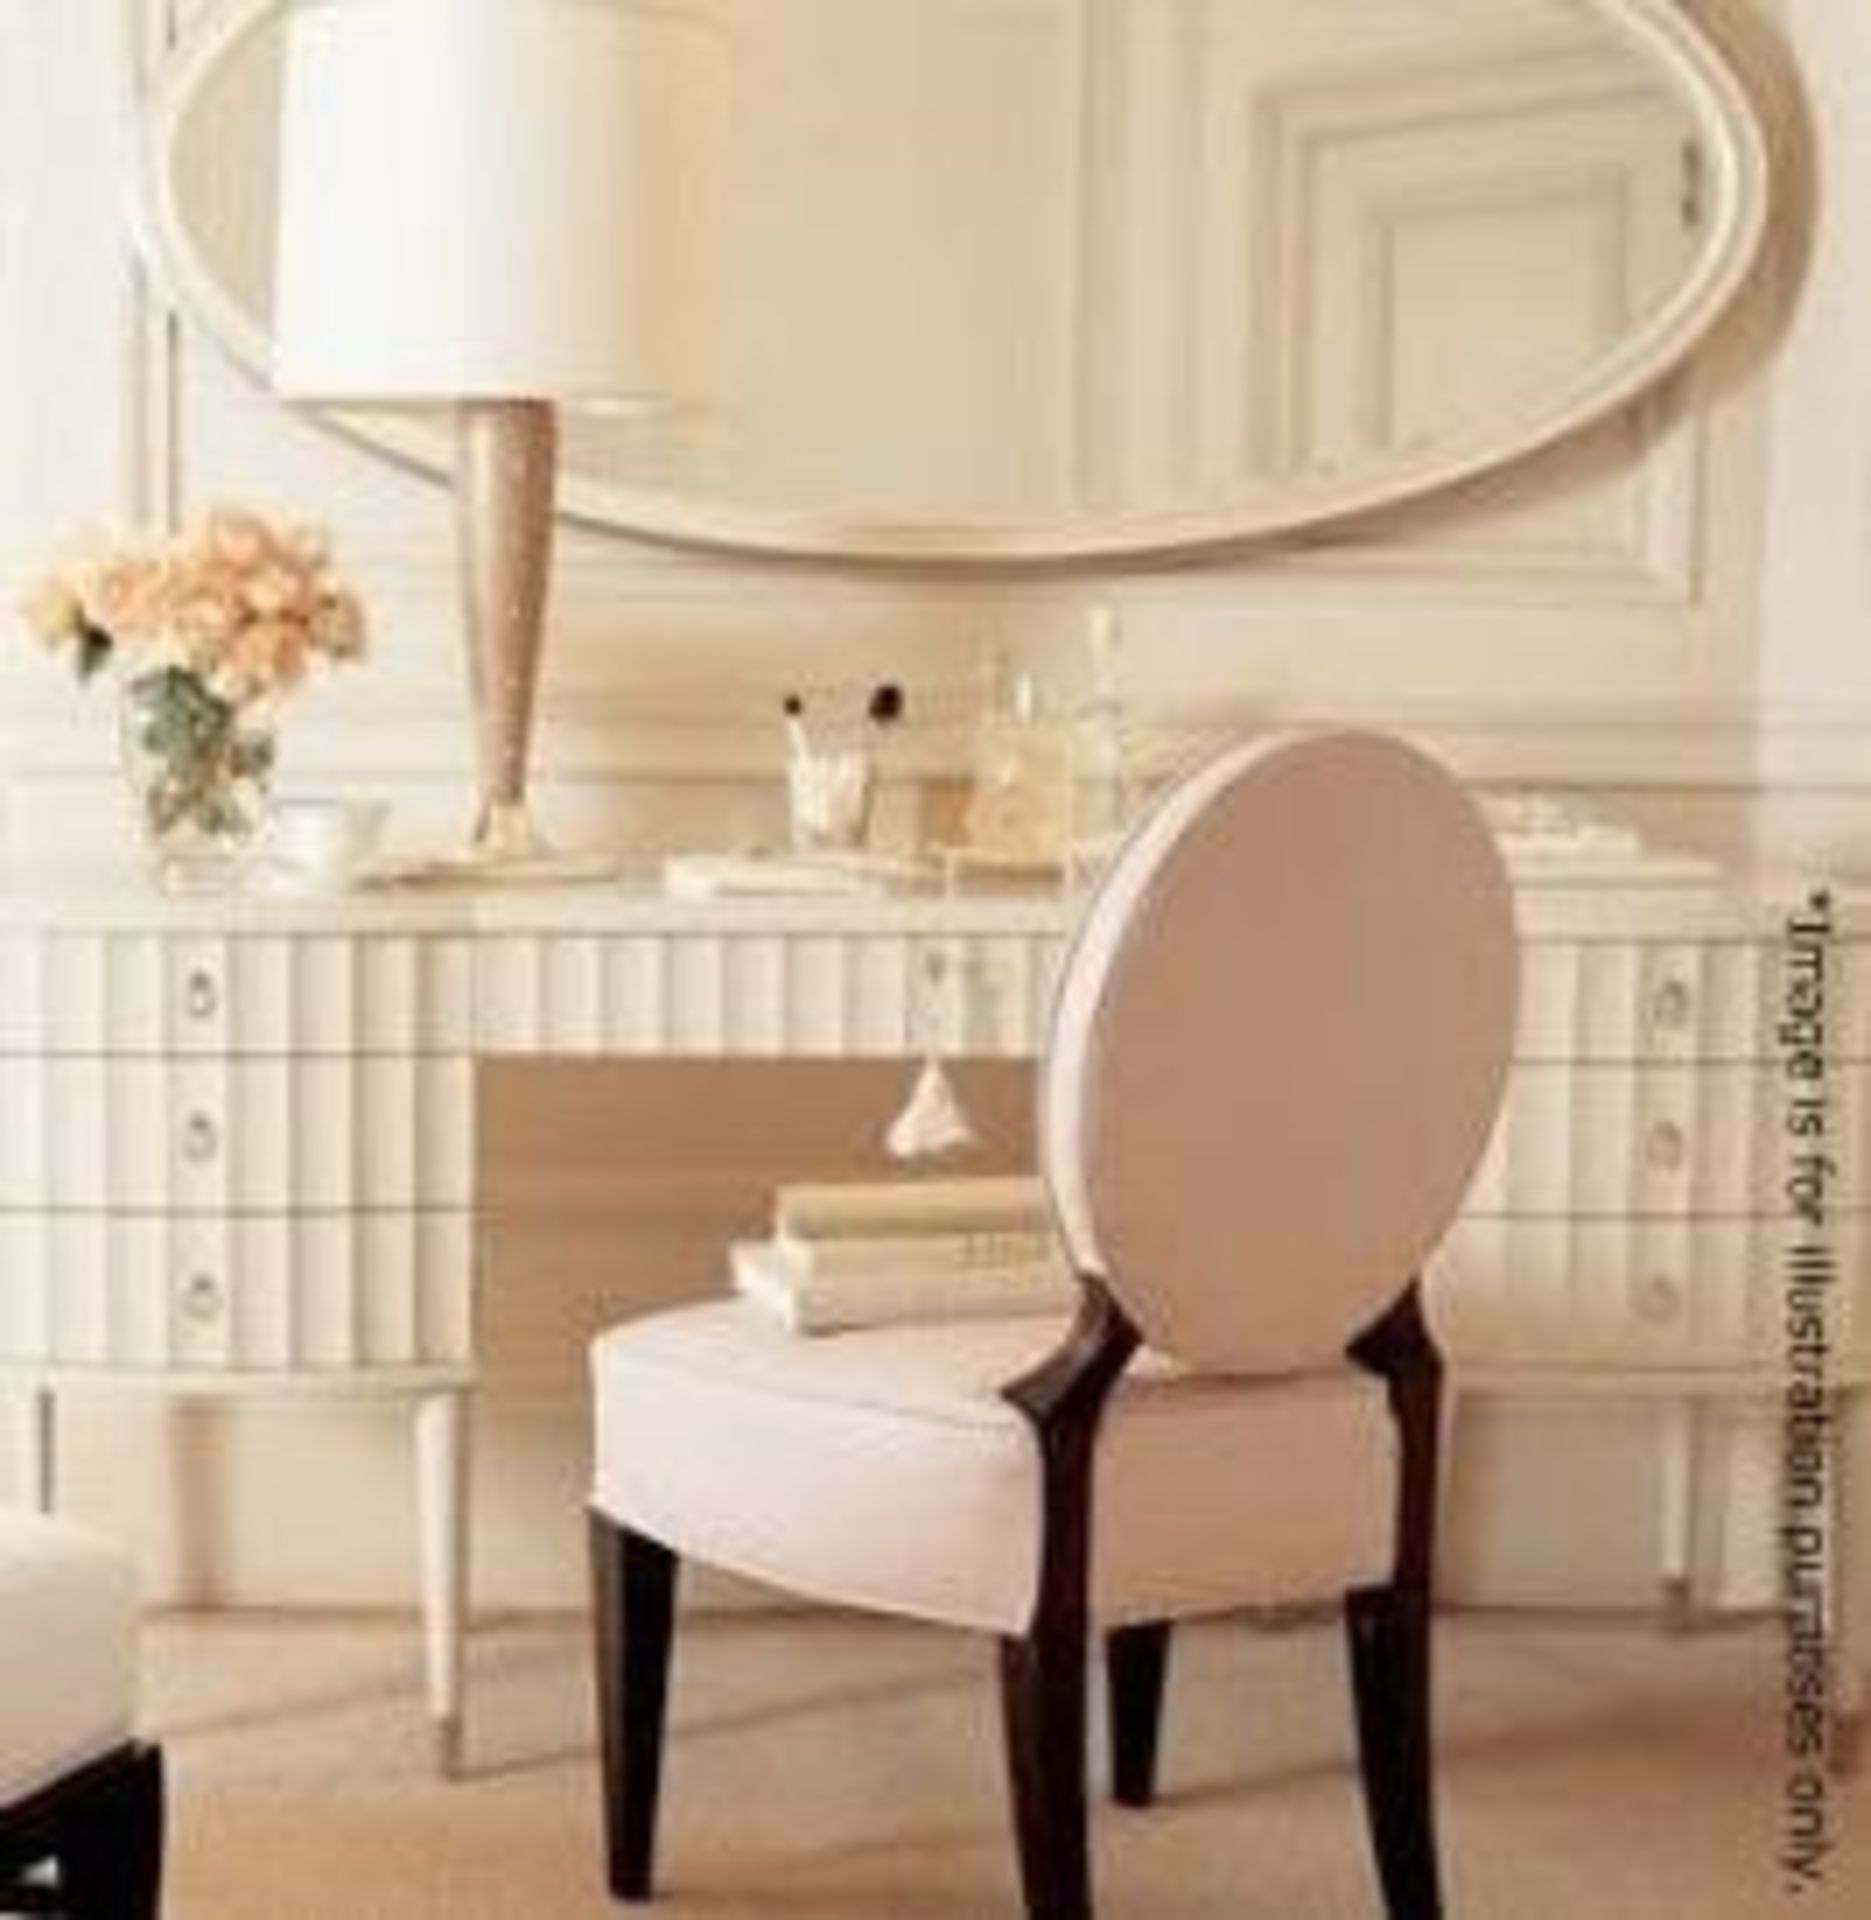 1 x BARBARA BARRY 'Horizon' Designer Oval Mirror With An Ivory Frame - Made In America - Dimensions: